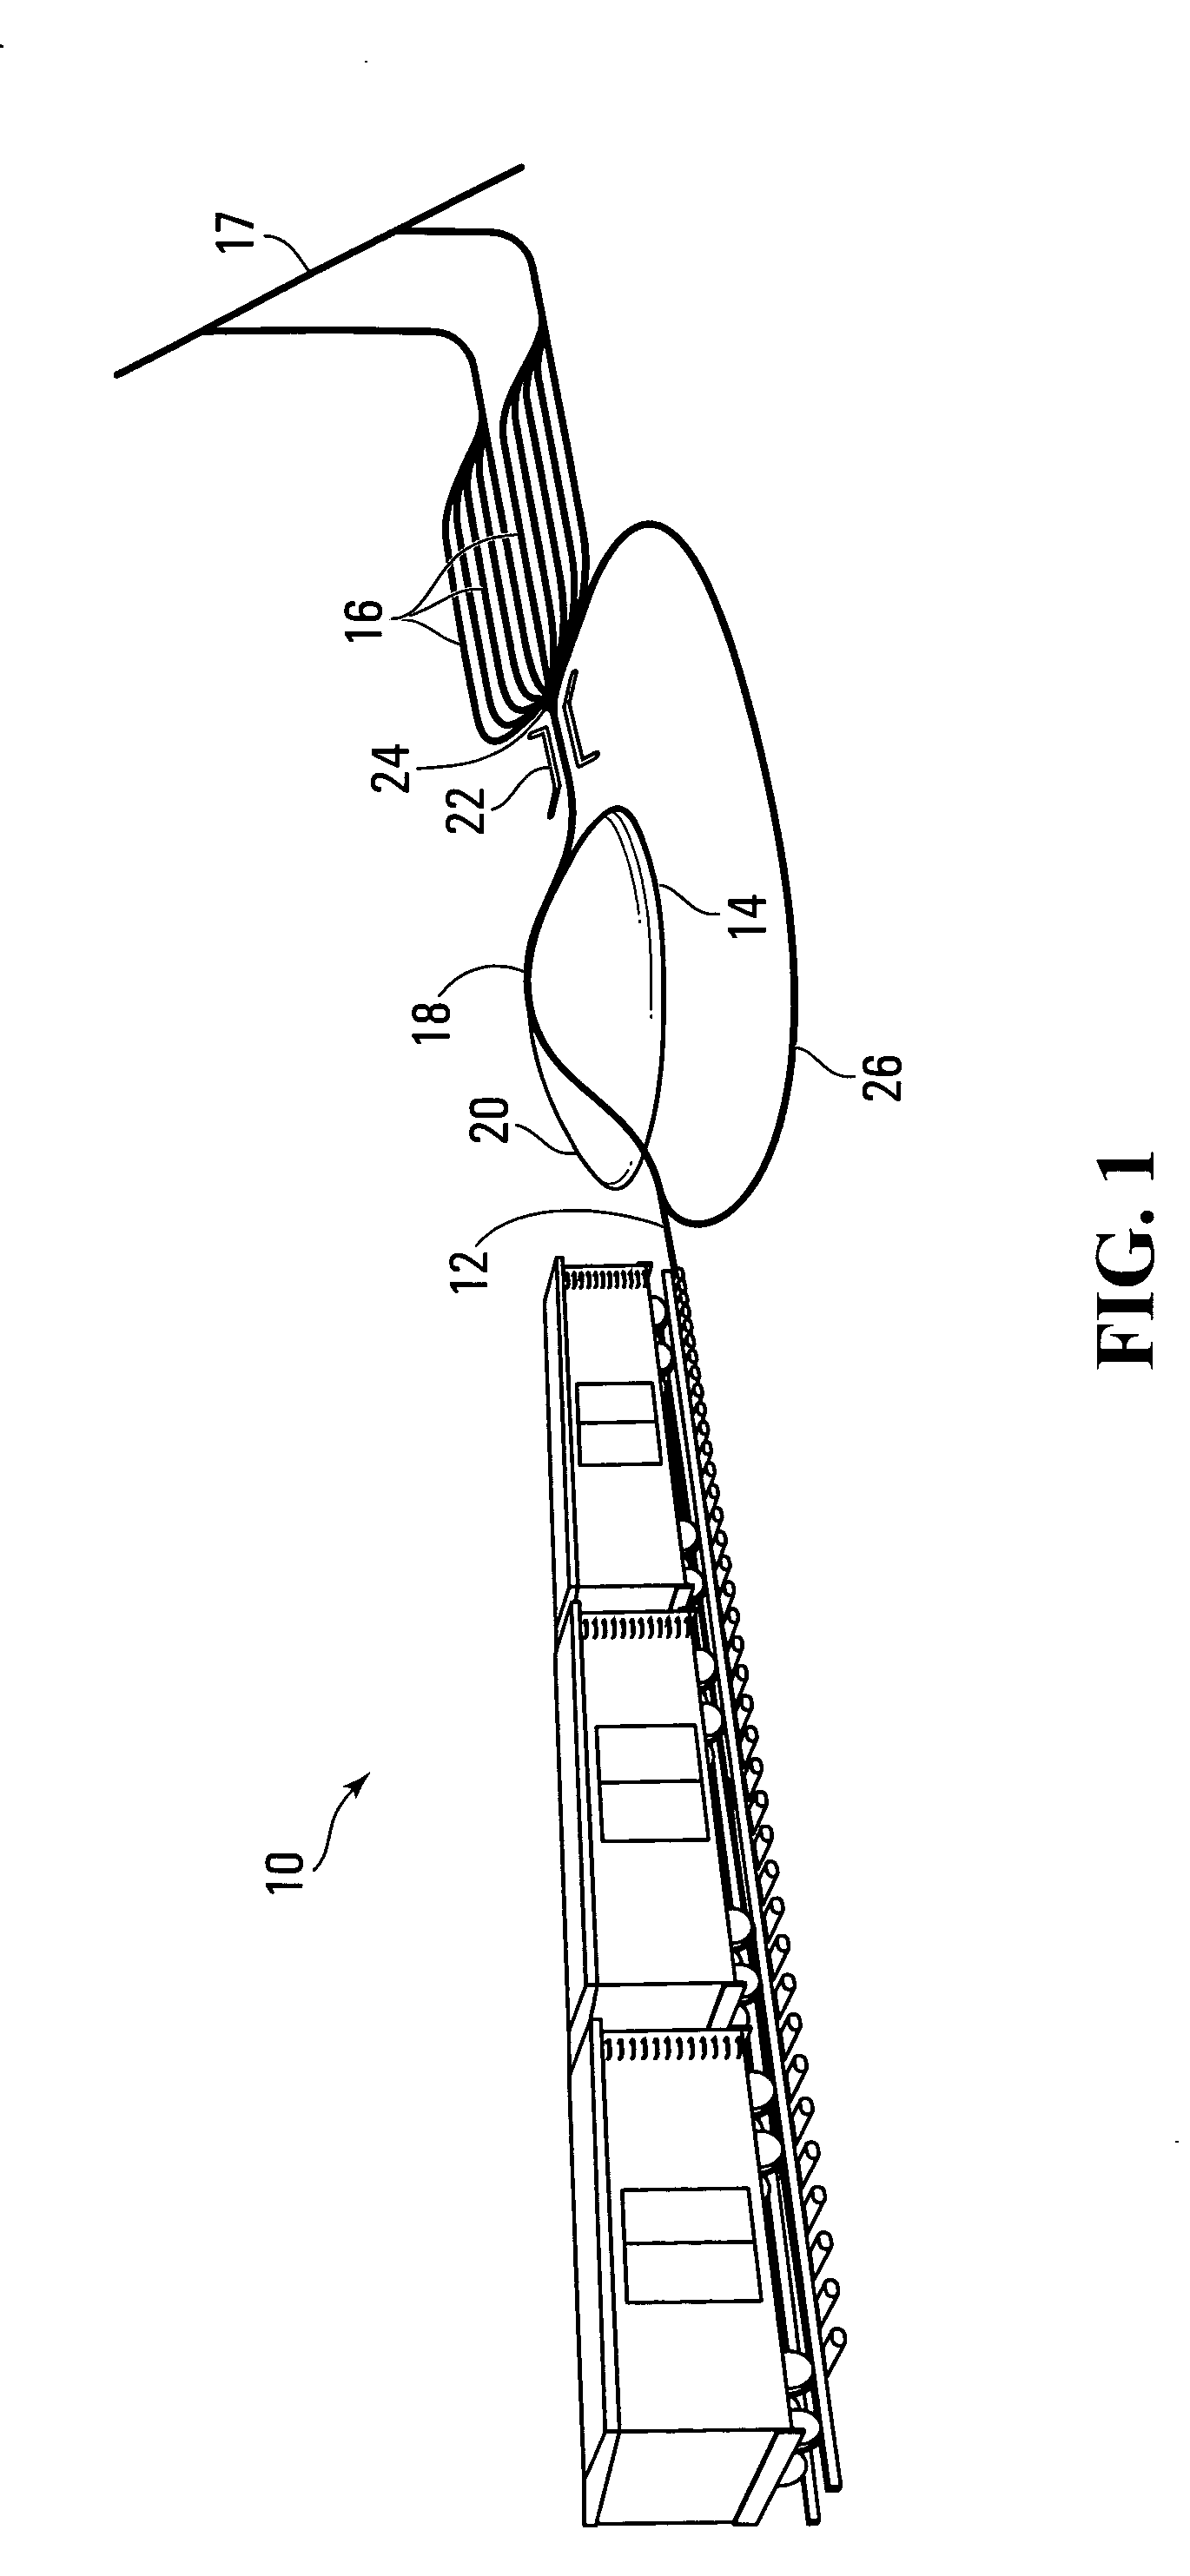 System and method for computing car switching solutions in a switchyard using car ETA as a factor